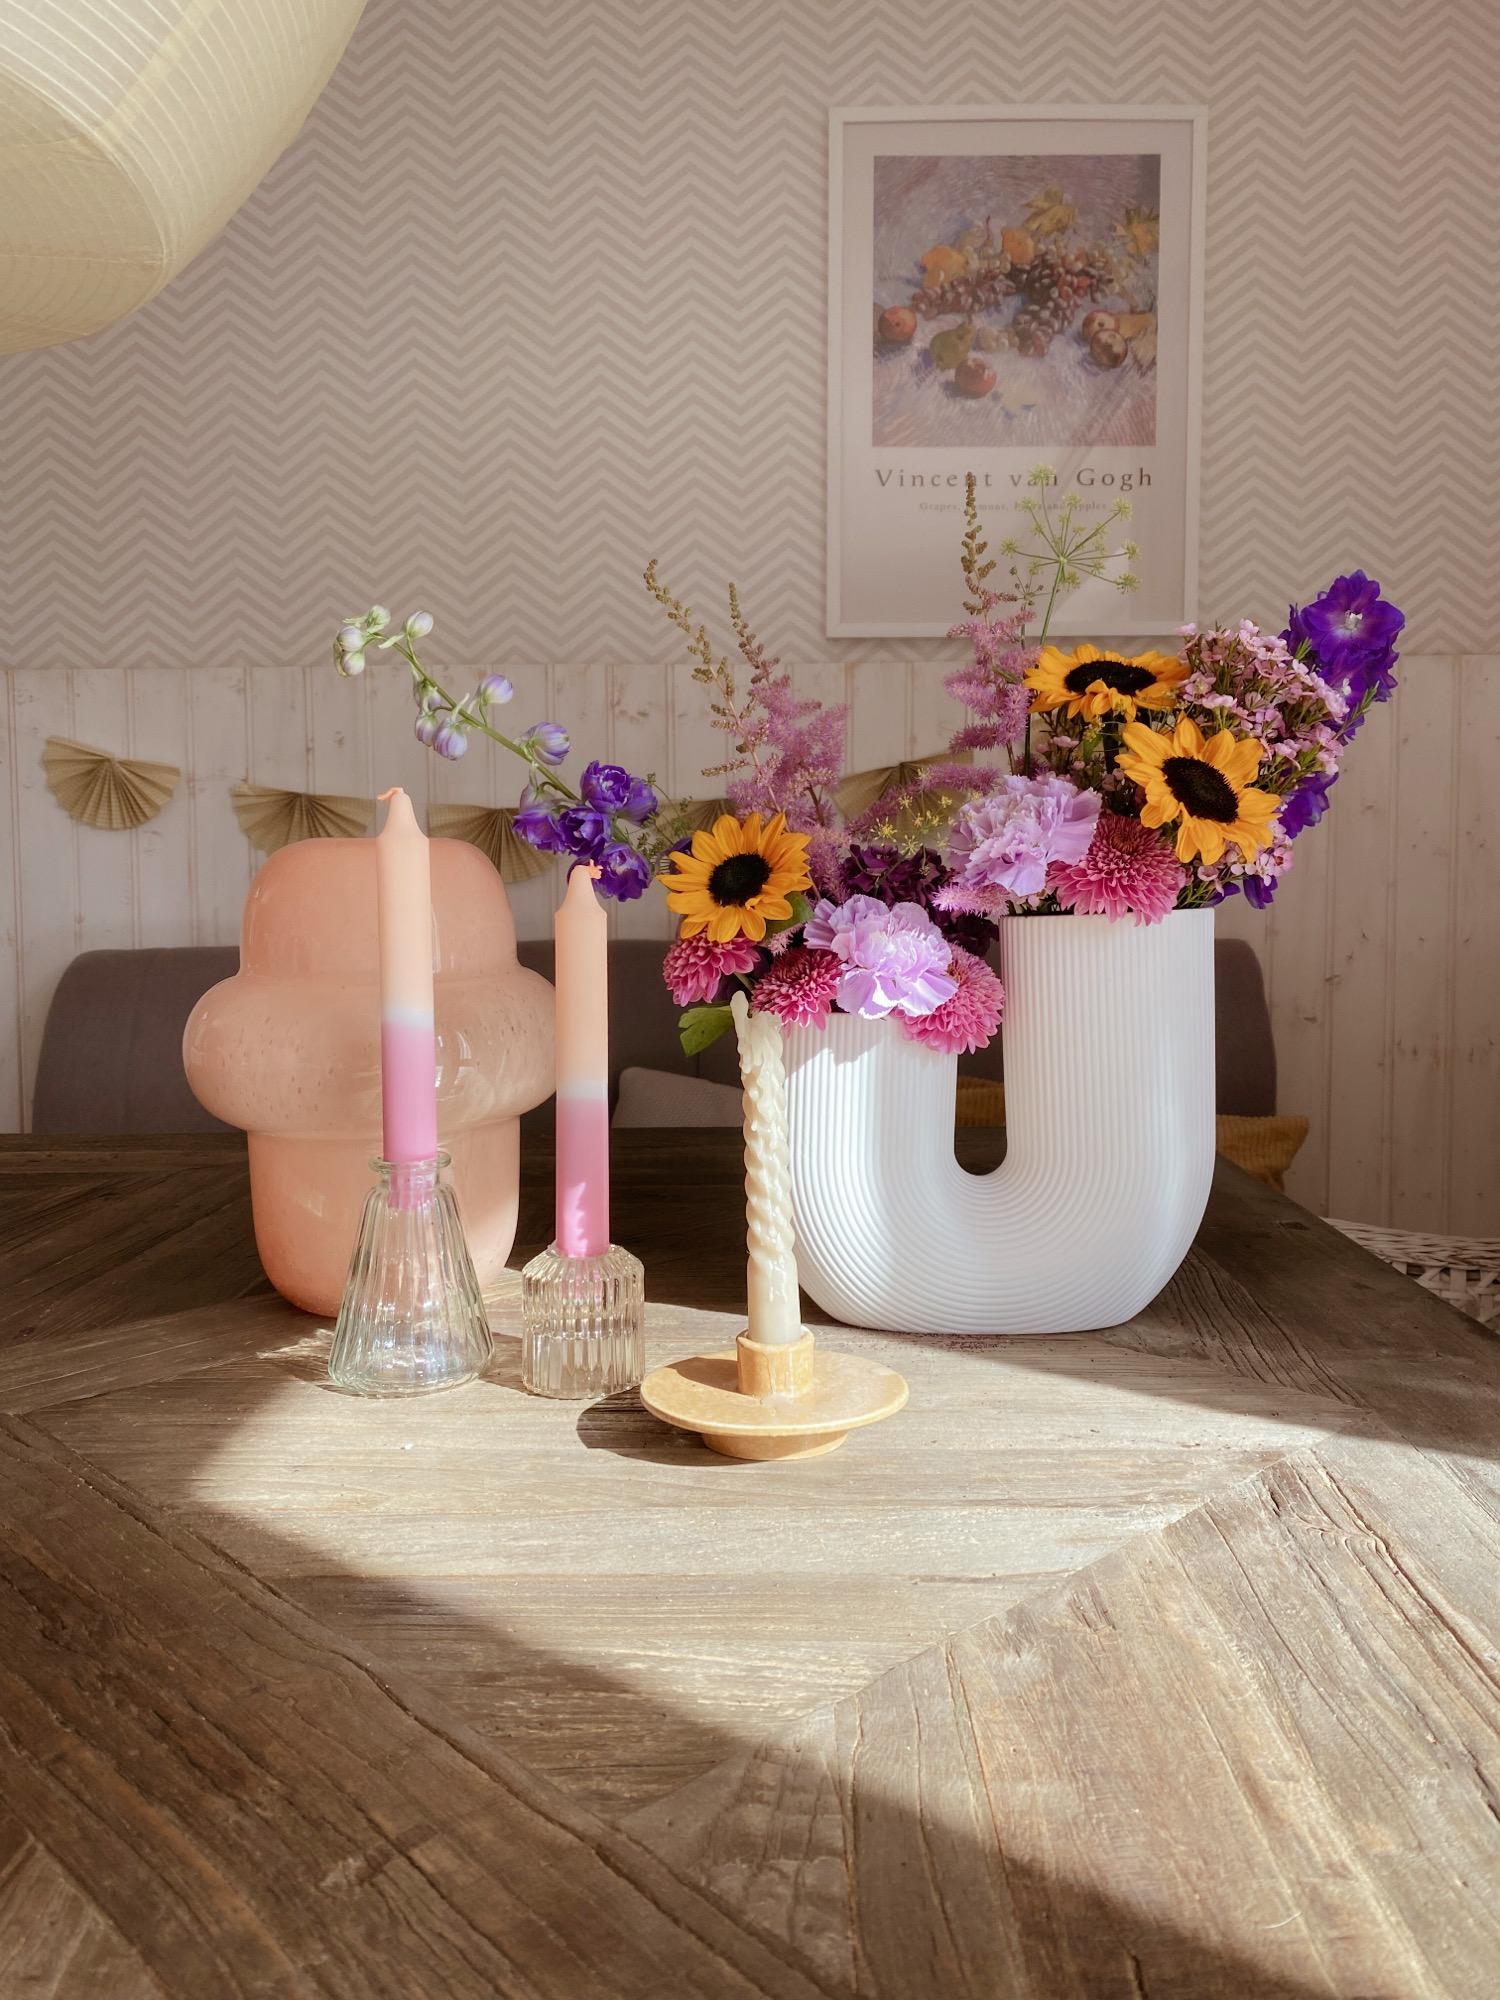 Septembersonne
#flowers#candles#prints#tablesetting#esszimmer#herbst#homestyle